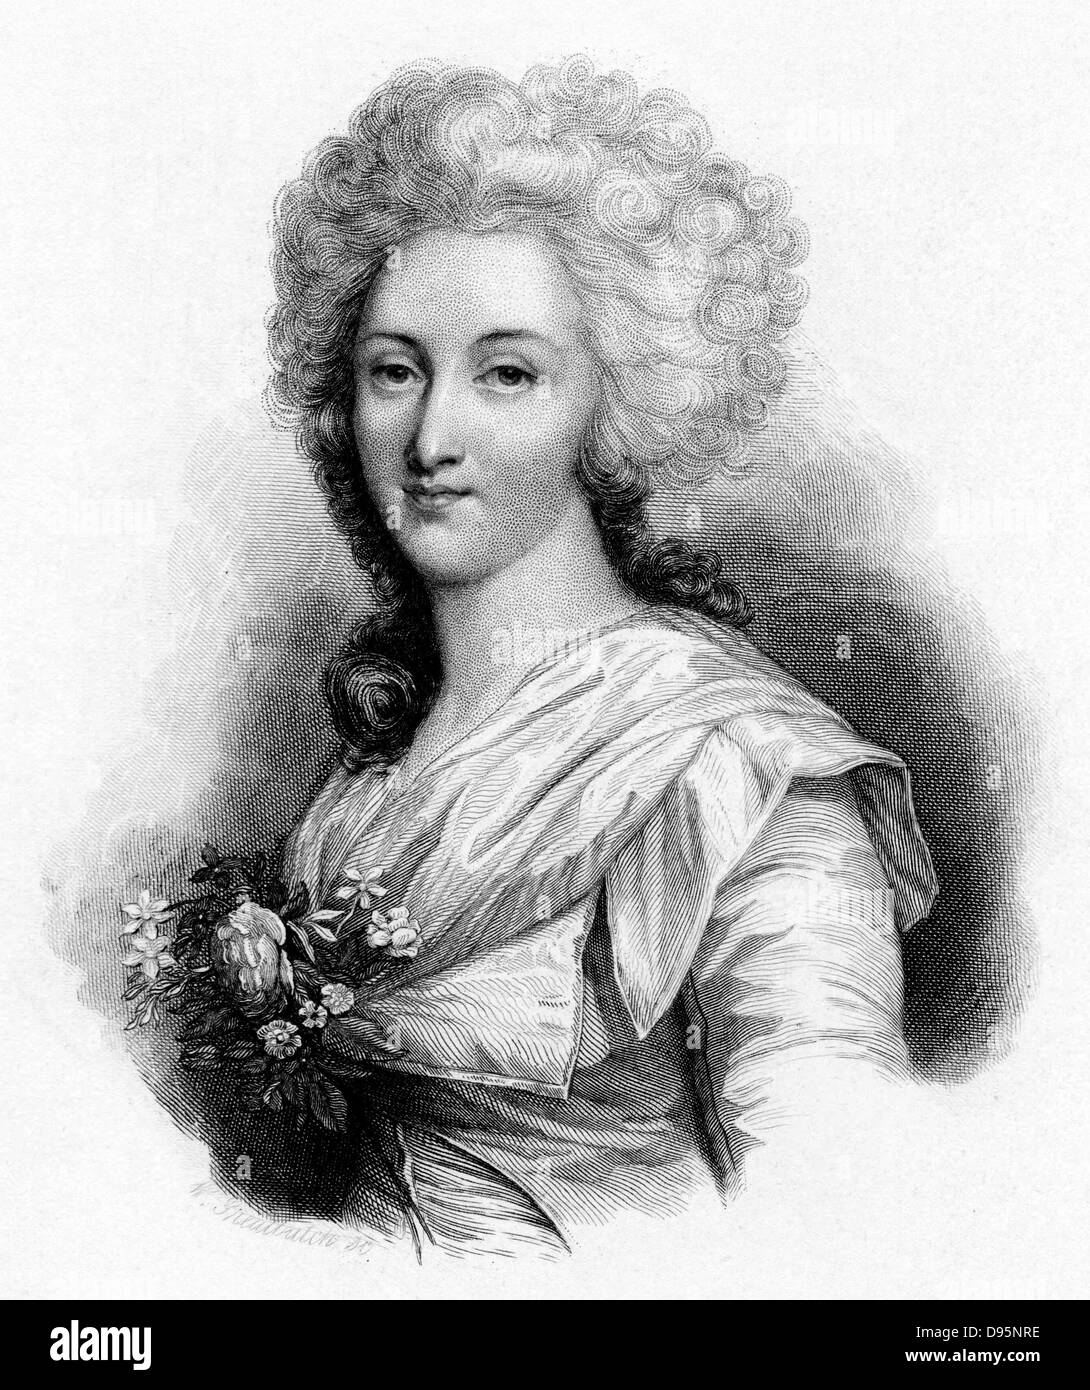 Madame Elizabeth (1764-94) sister of Louis XVI, guillotined during the French Revolution. Engraving. Stock Photo